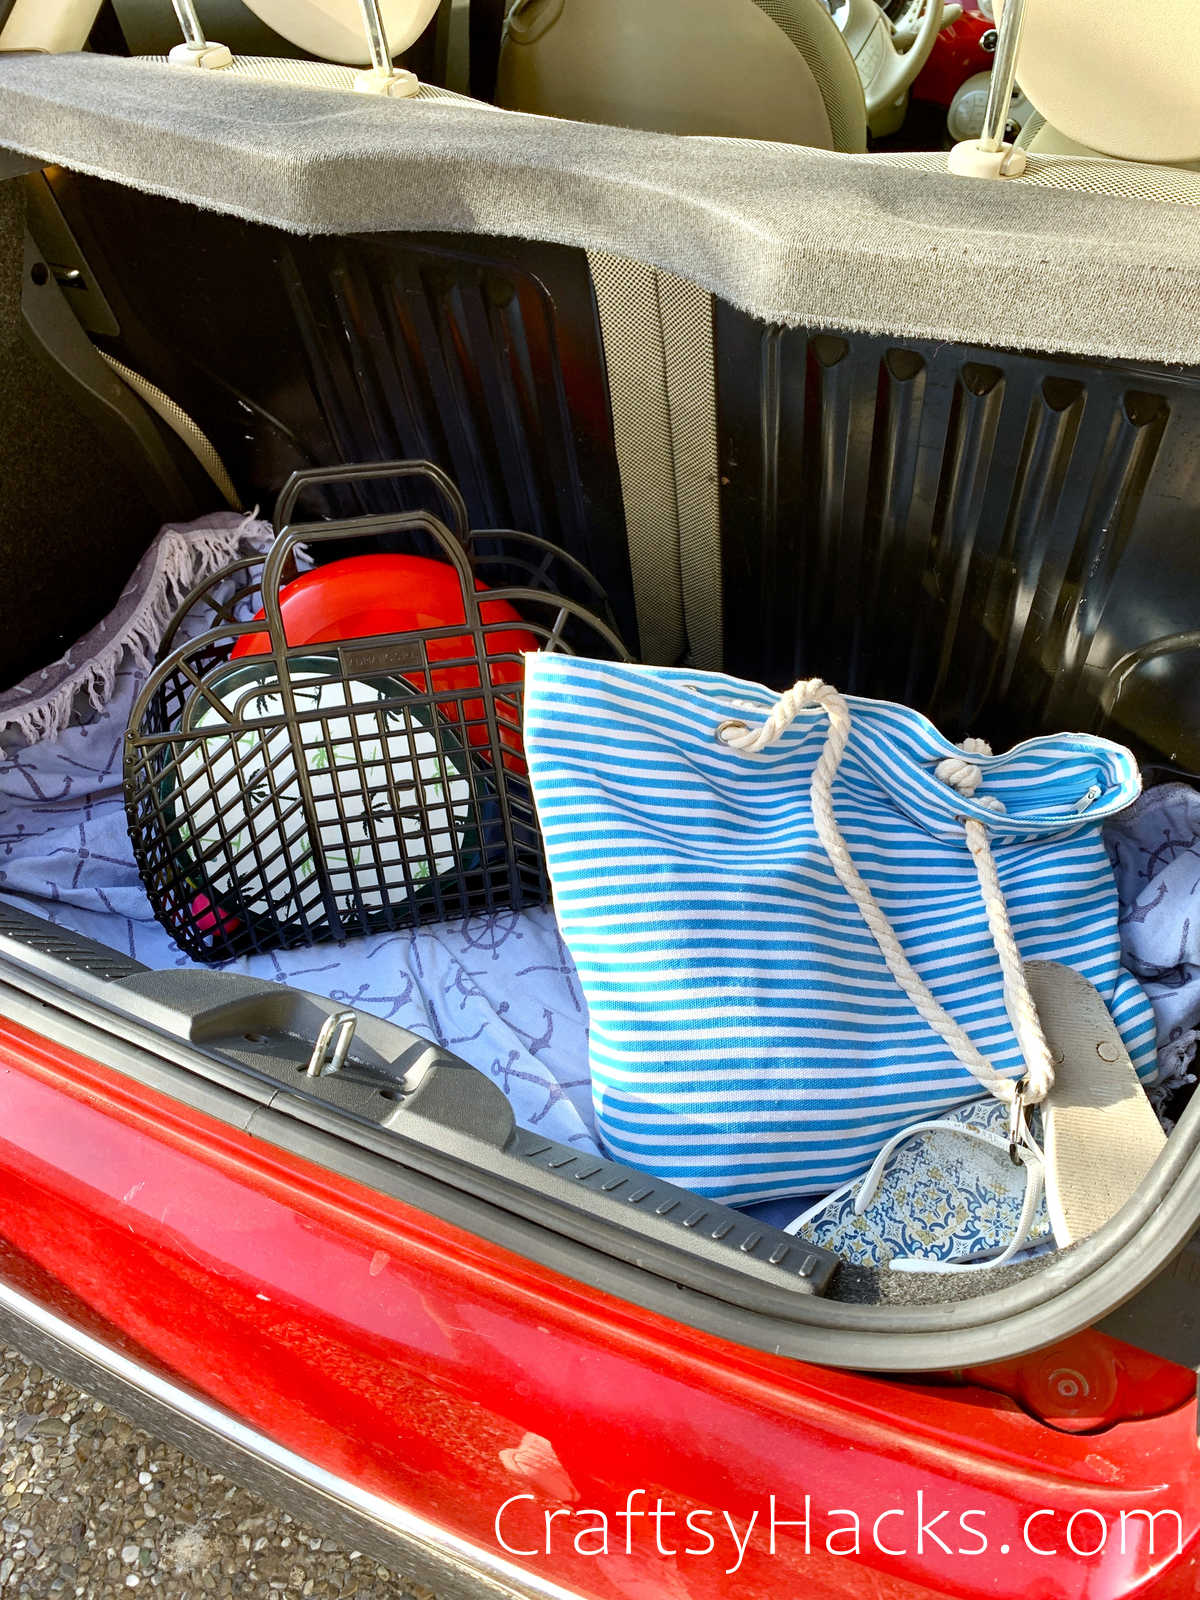 place a towel in a car to keep it clean